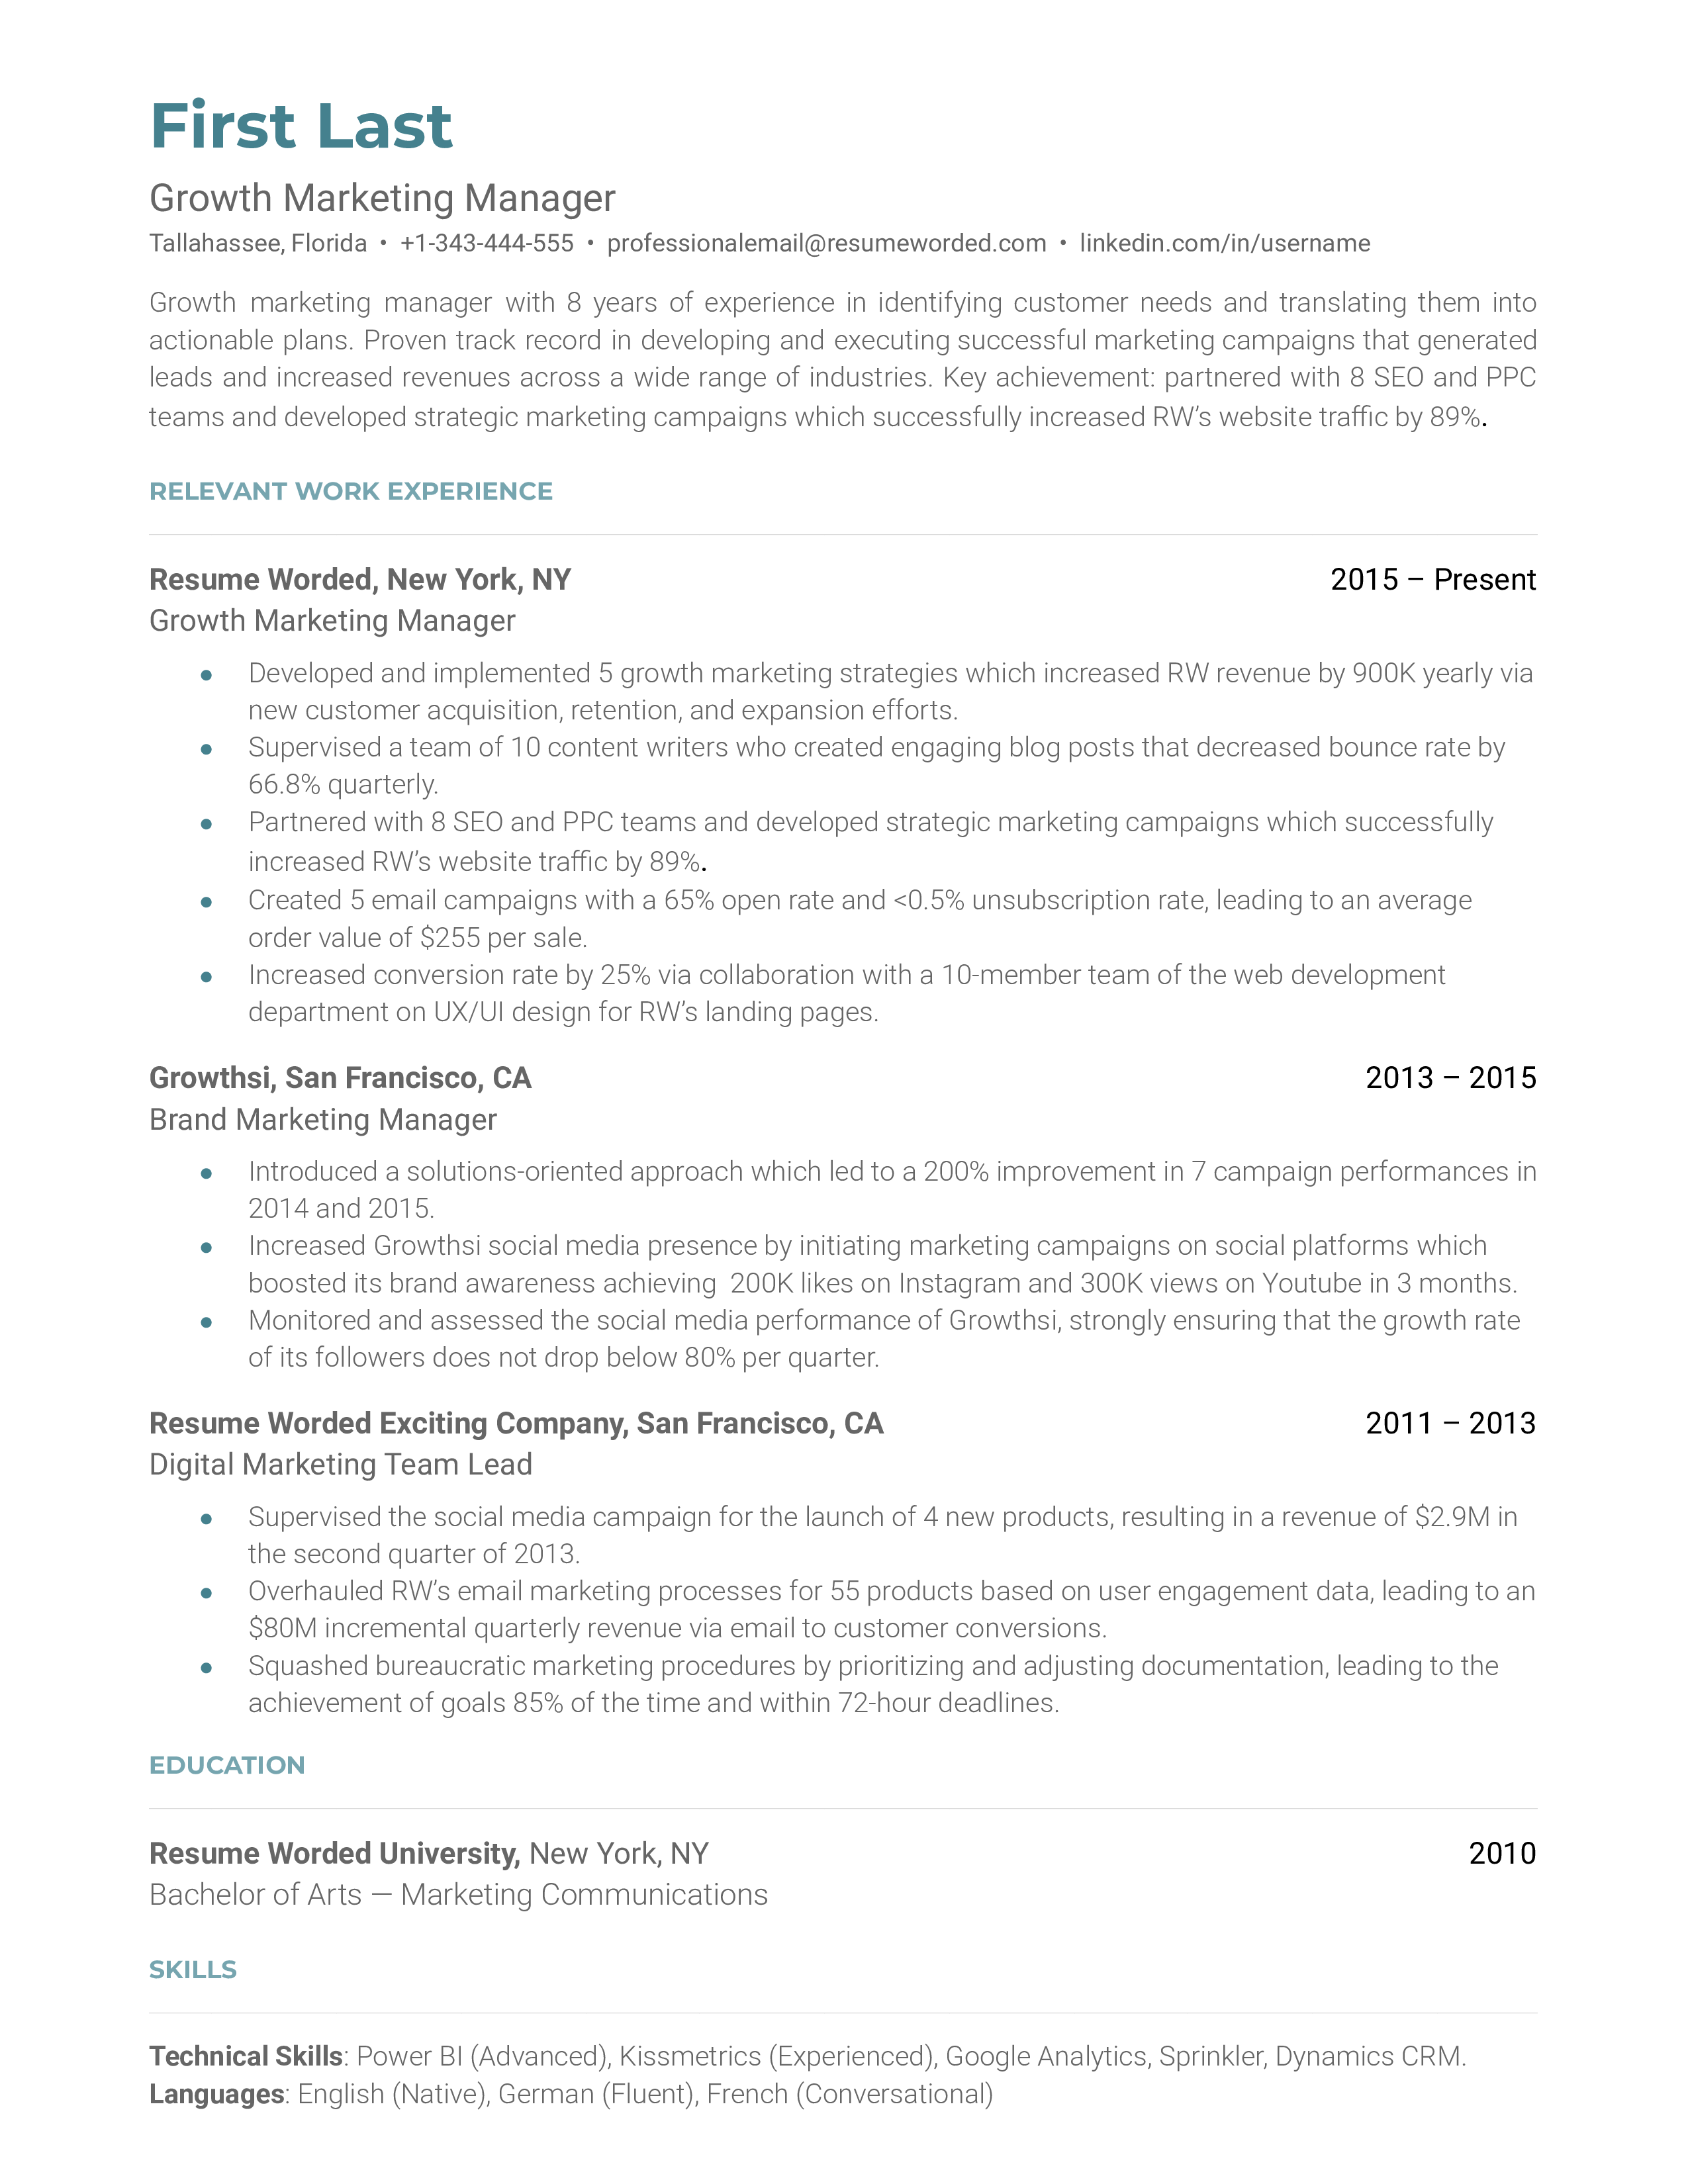 Growth Marketing Manager Resume Sample